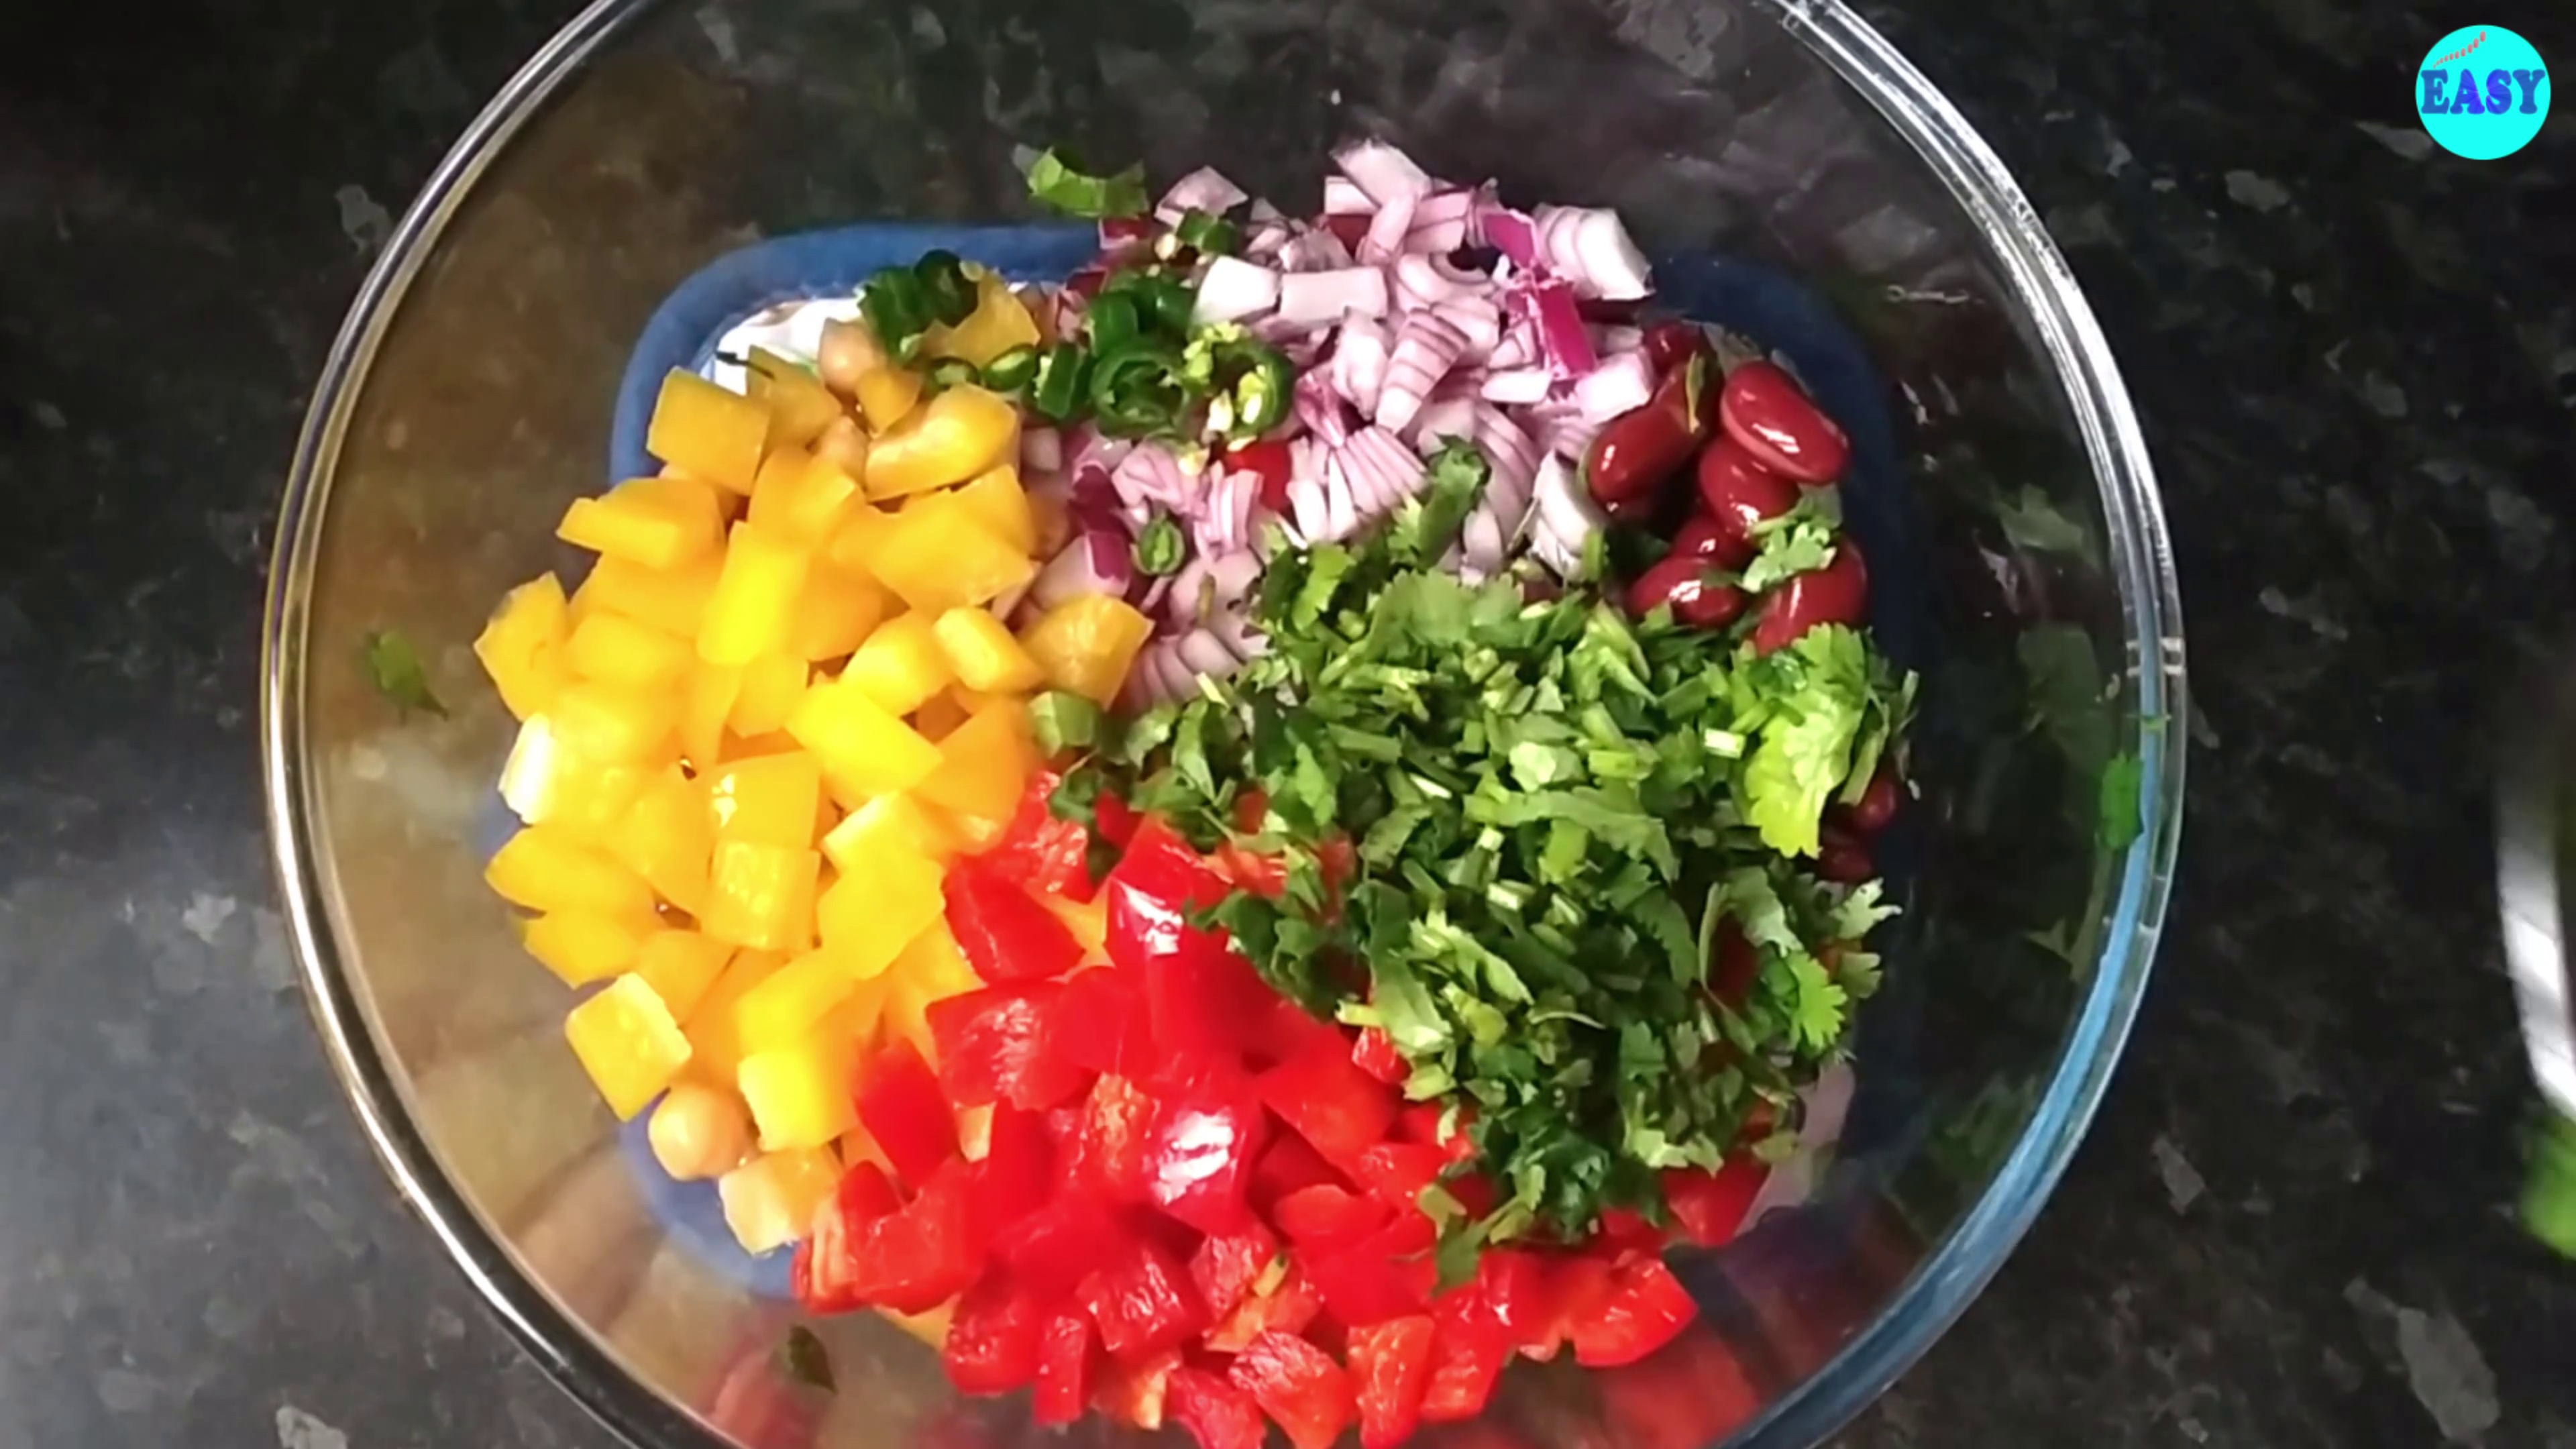 Step 1 - In a large mixing bowl, combine beans, chickpeas, corns, onions, cilantro and bell peppers.